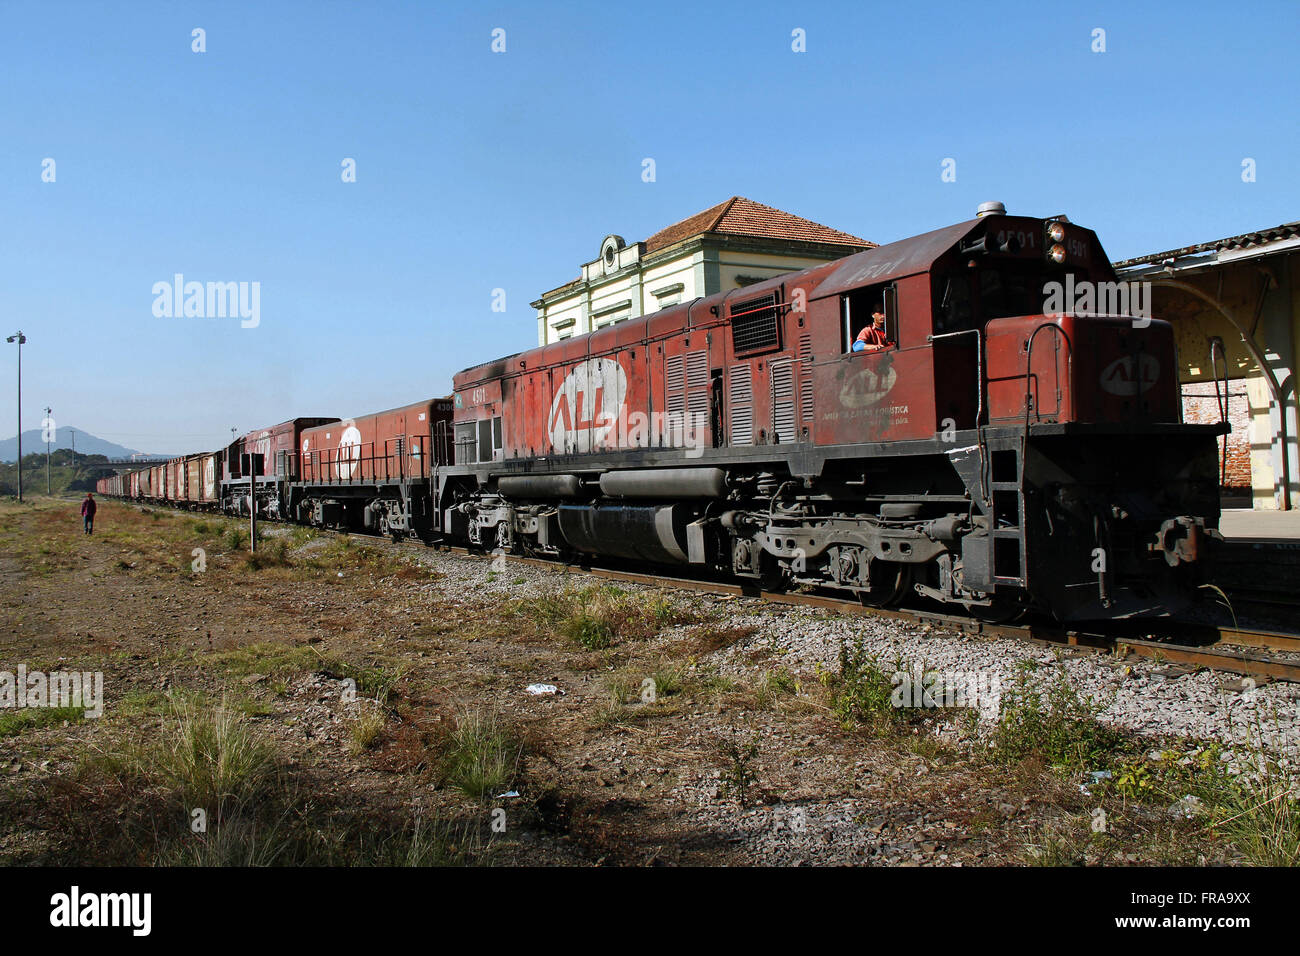 Two locomotives pulling freight train wagons on railway administered by ALL Stock Photo